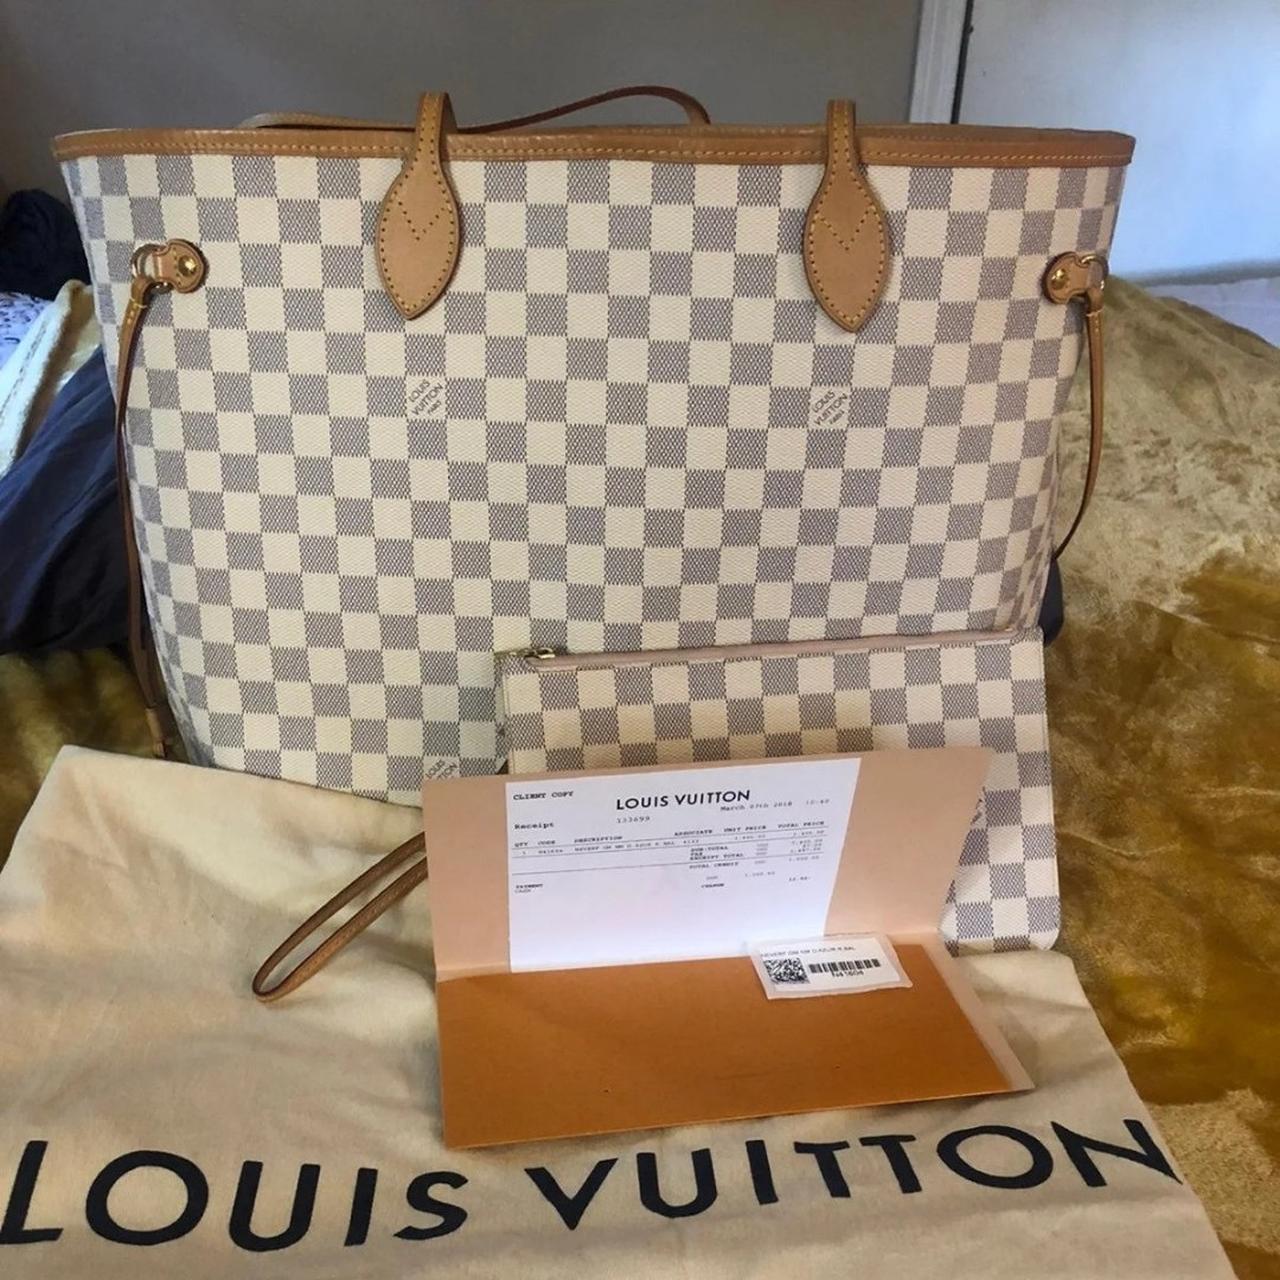 Louis Vuitton Neverfull MM for sale, some wear - Depop